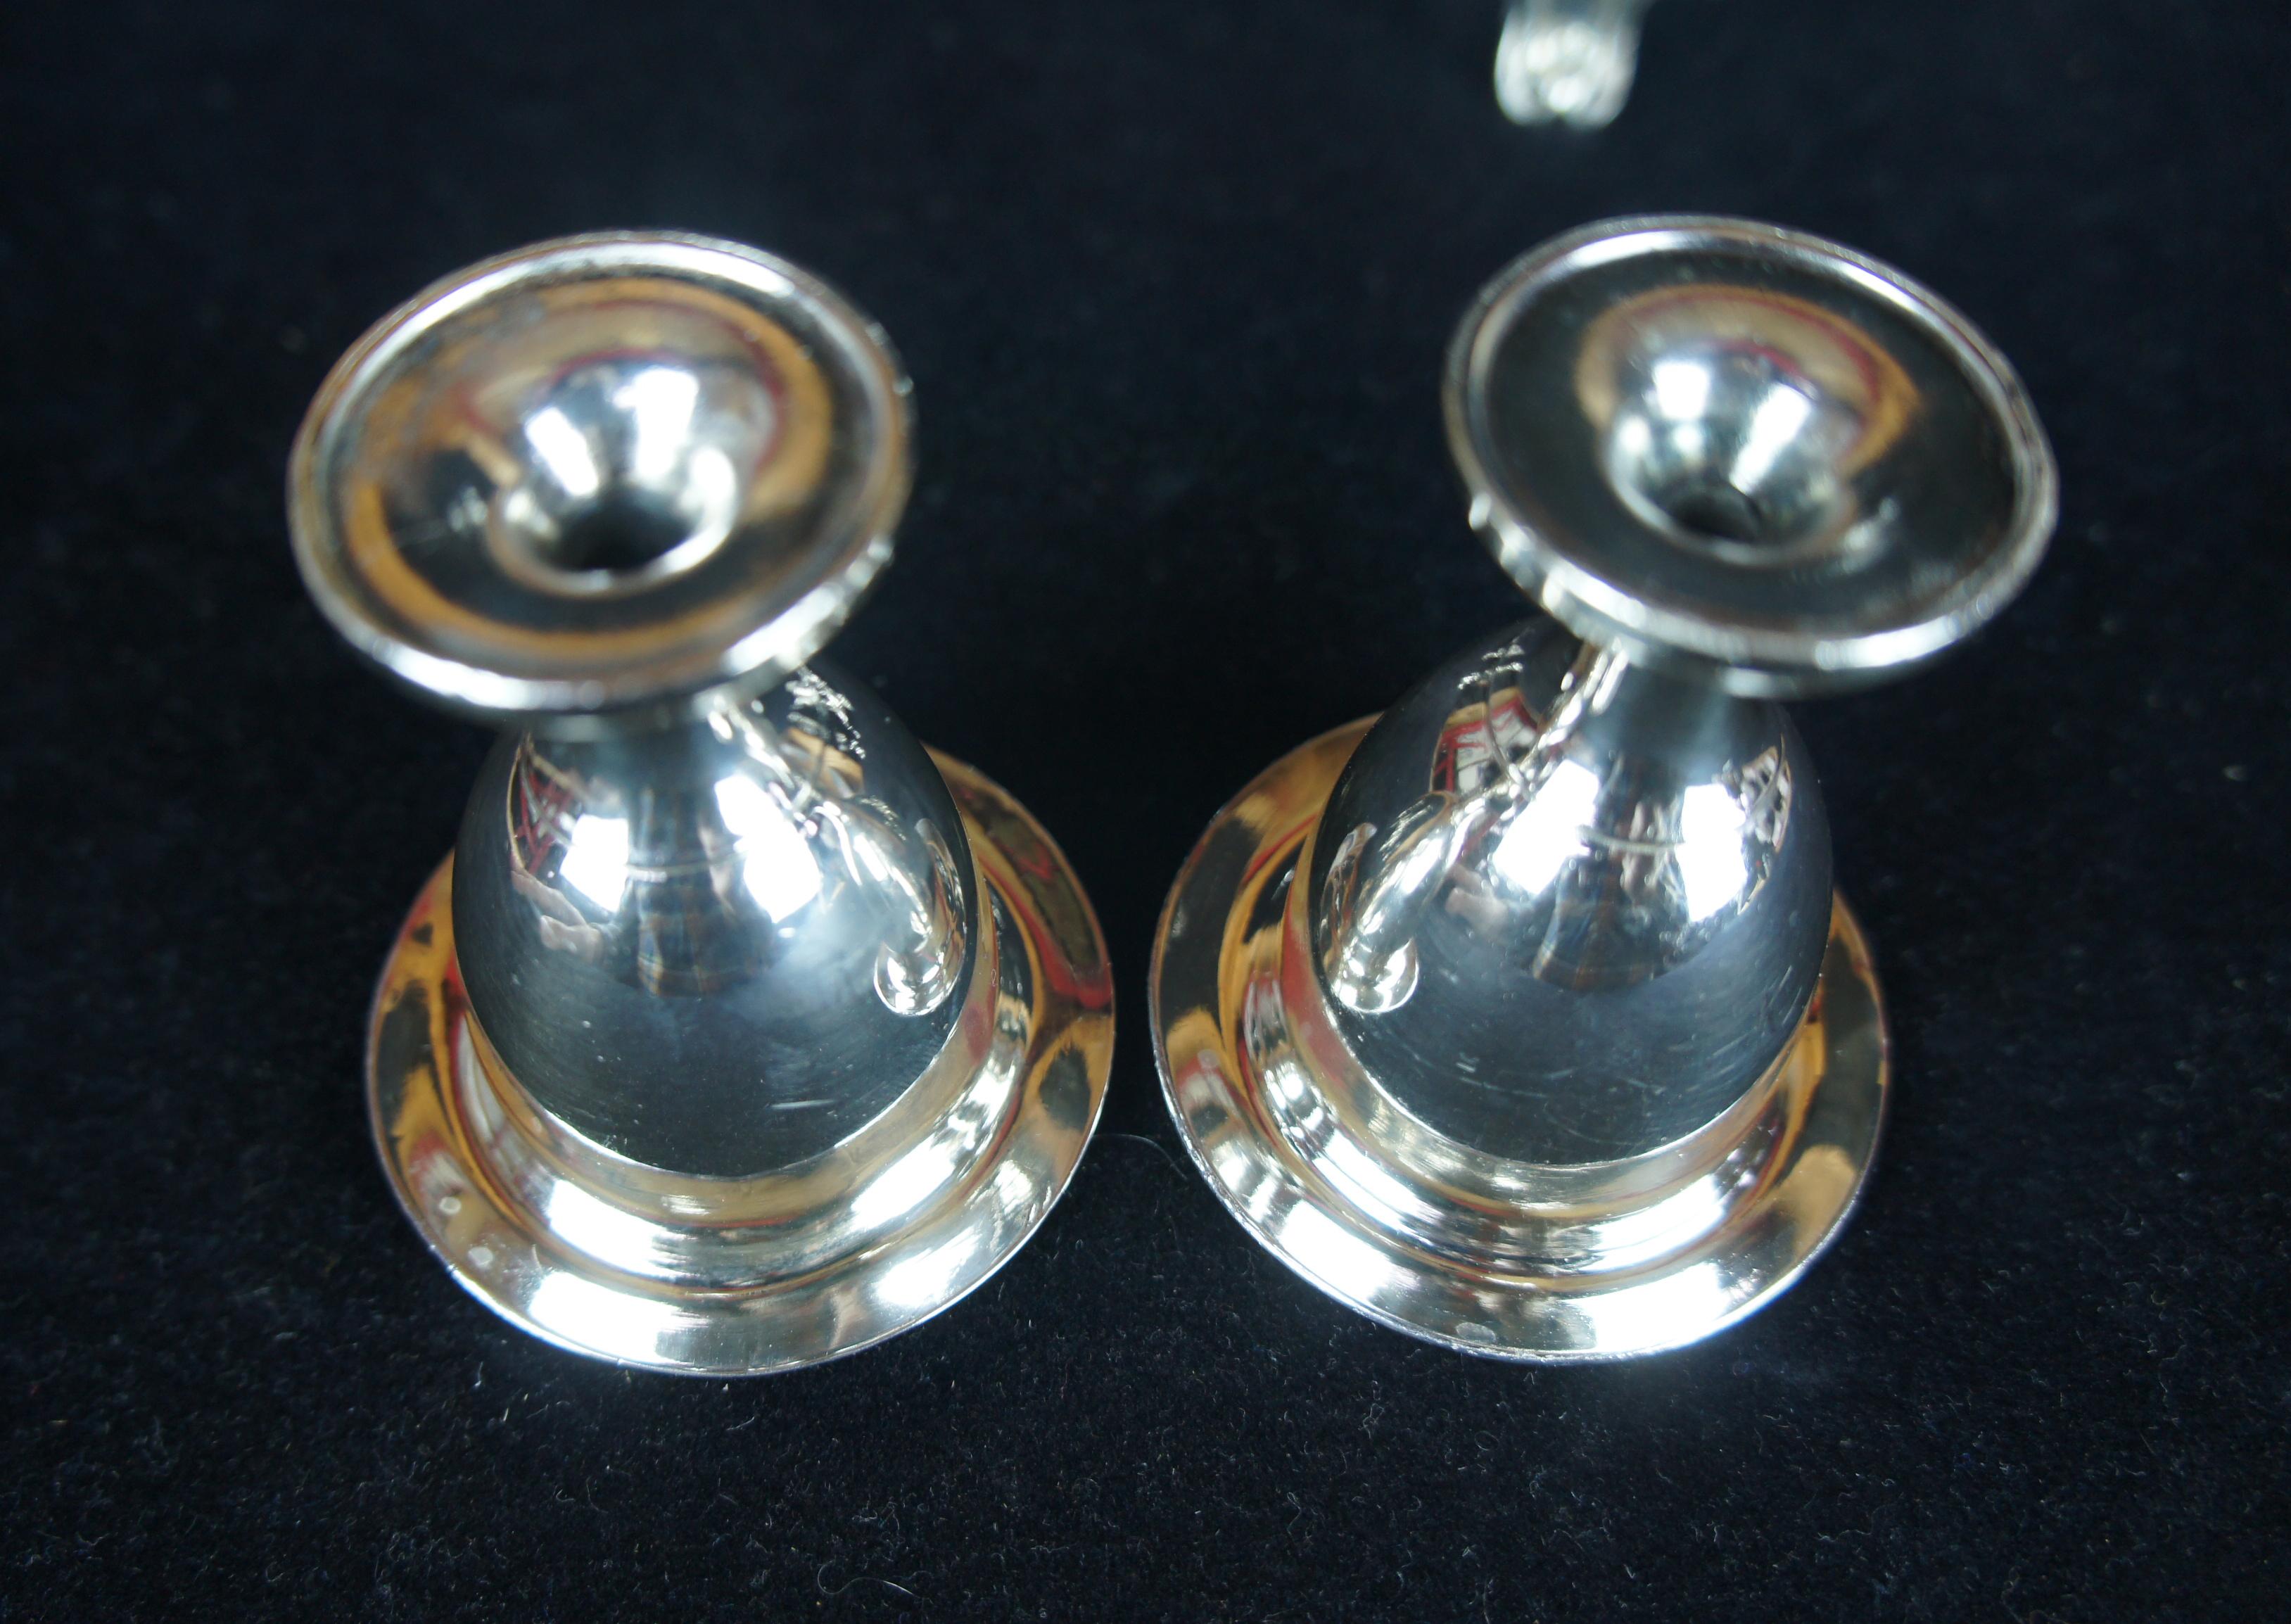 6 Baroque Silver Plated Kiddush Cup Goblets & Caddy Judaica Barware Shot Glasses In Good Condition For Sale In Dayton, OH